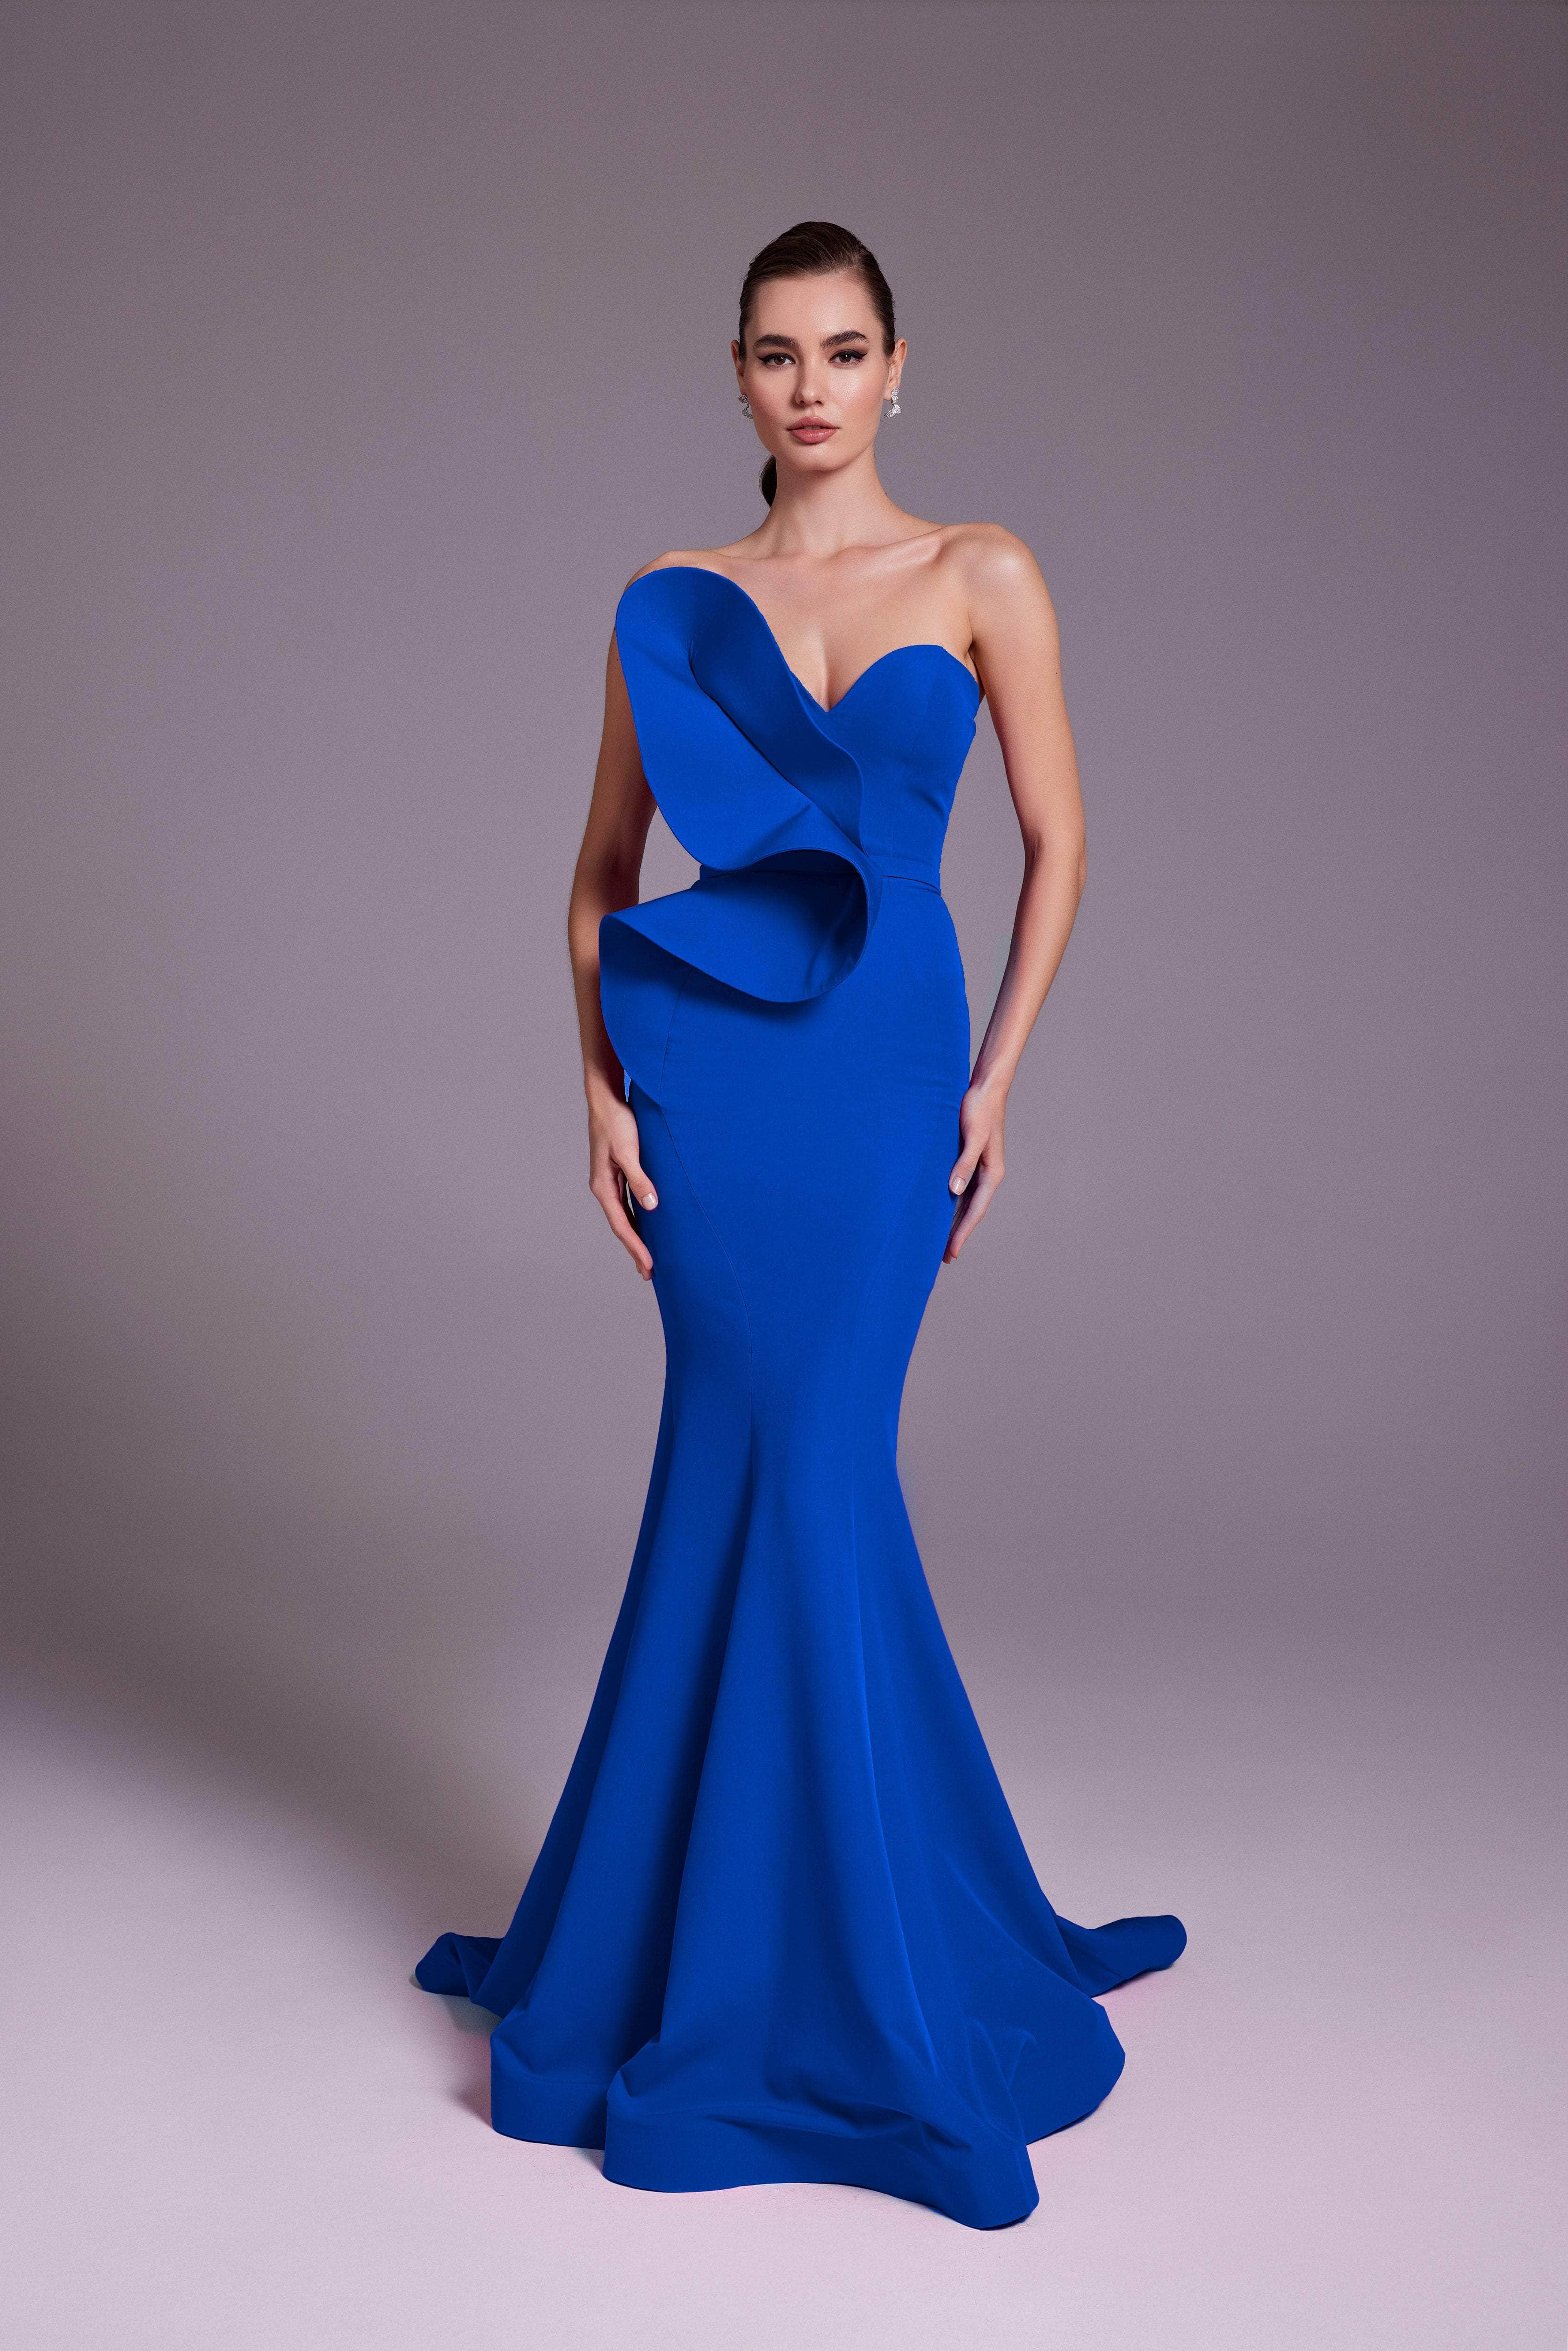 Image of MNM Couture N0548 - Strapless Crepe Mermaid Gown